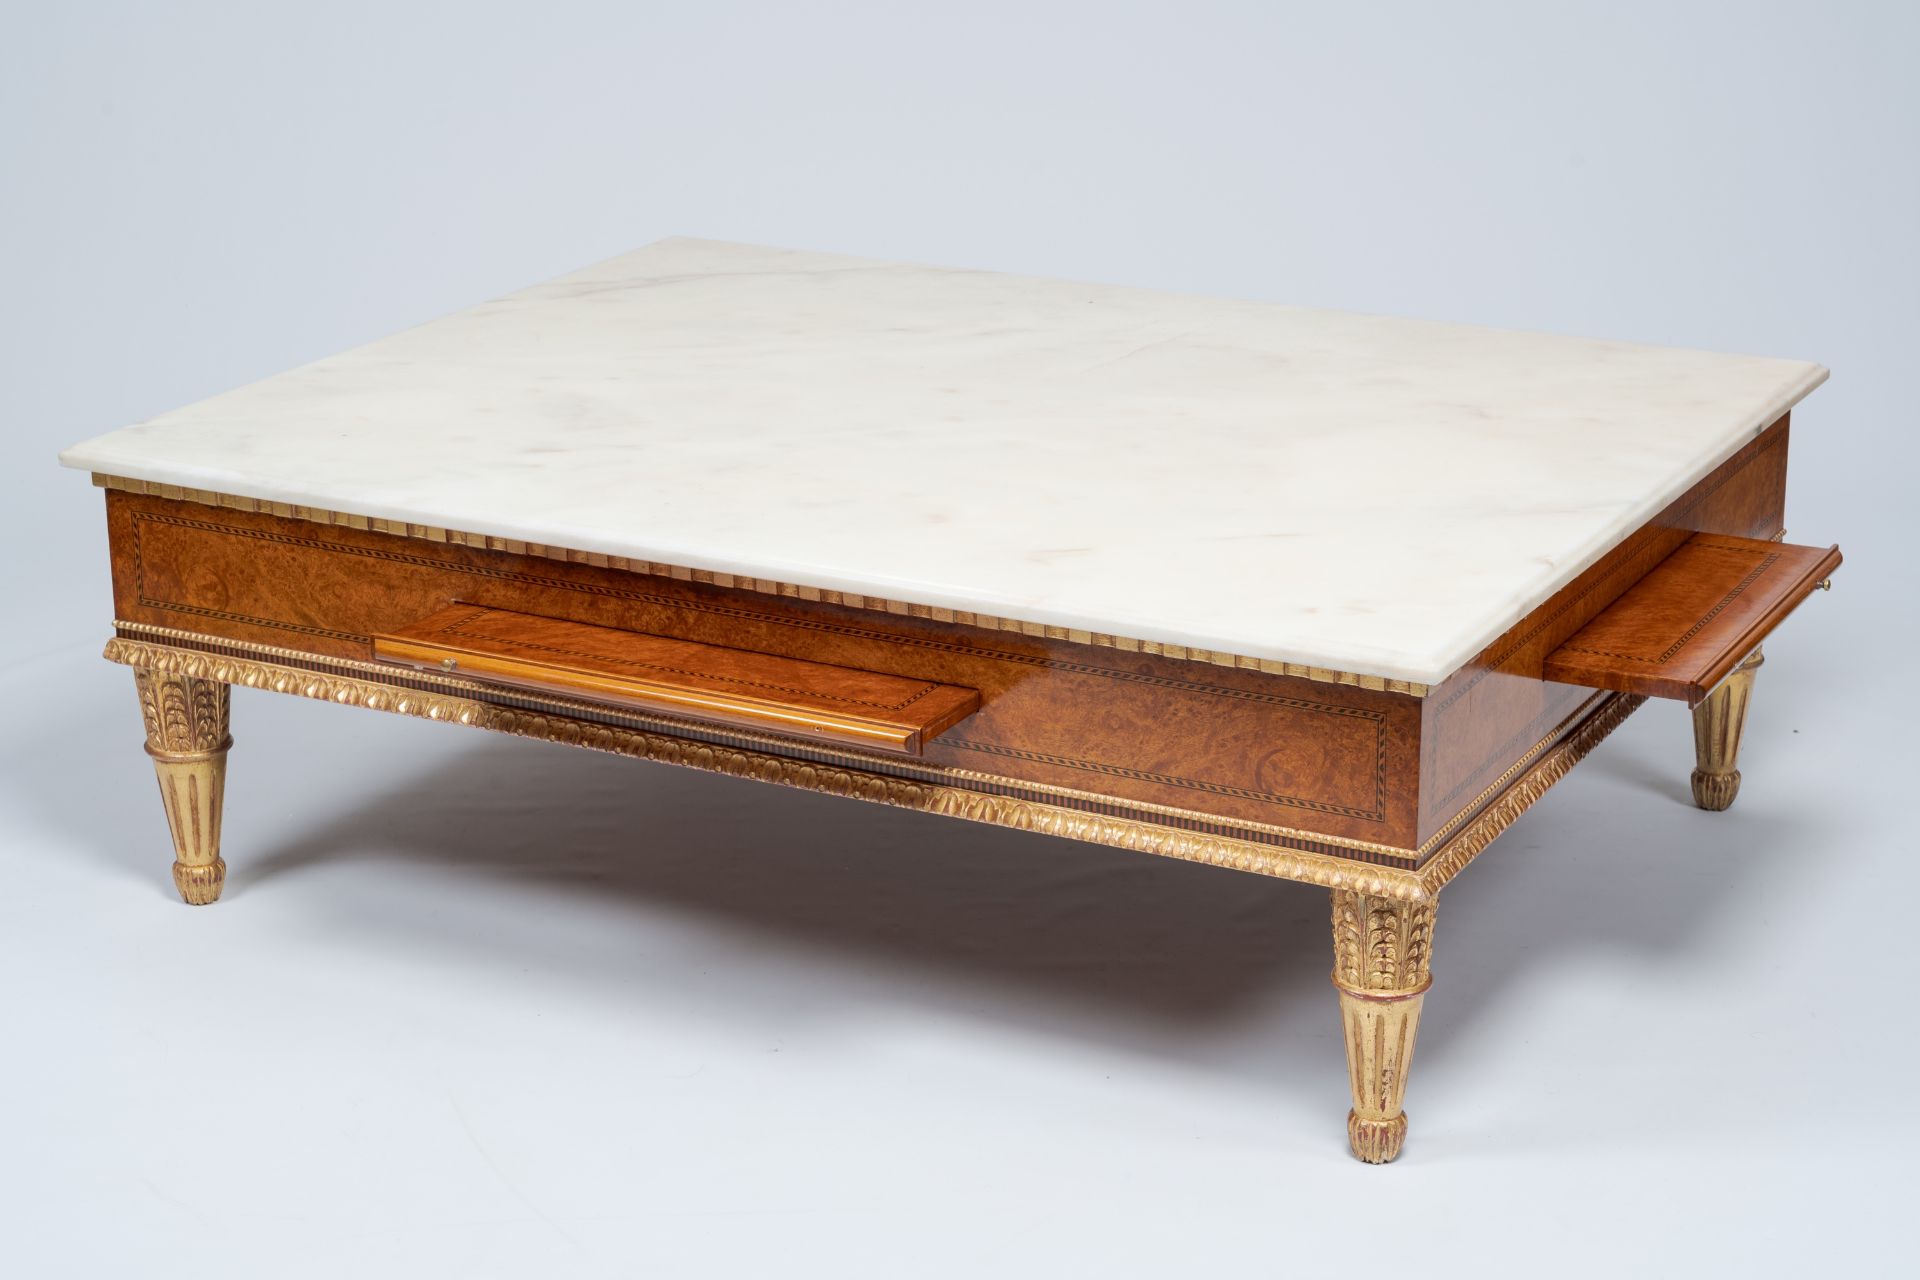 A Neoclassical partly gilt wood coffee table with marble top and four extendable plateaus, 20th C. - Image 2 of 8